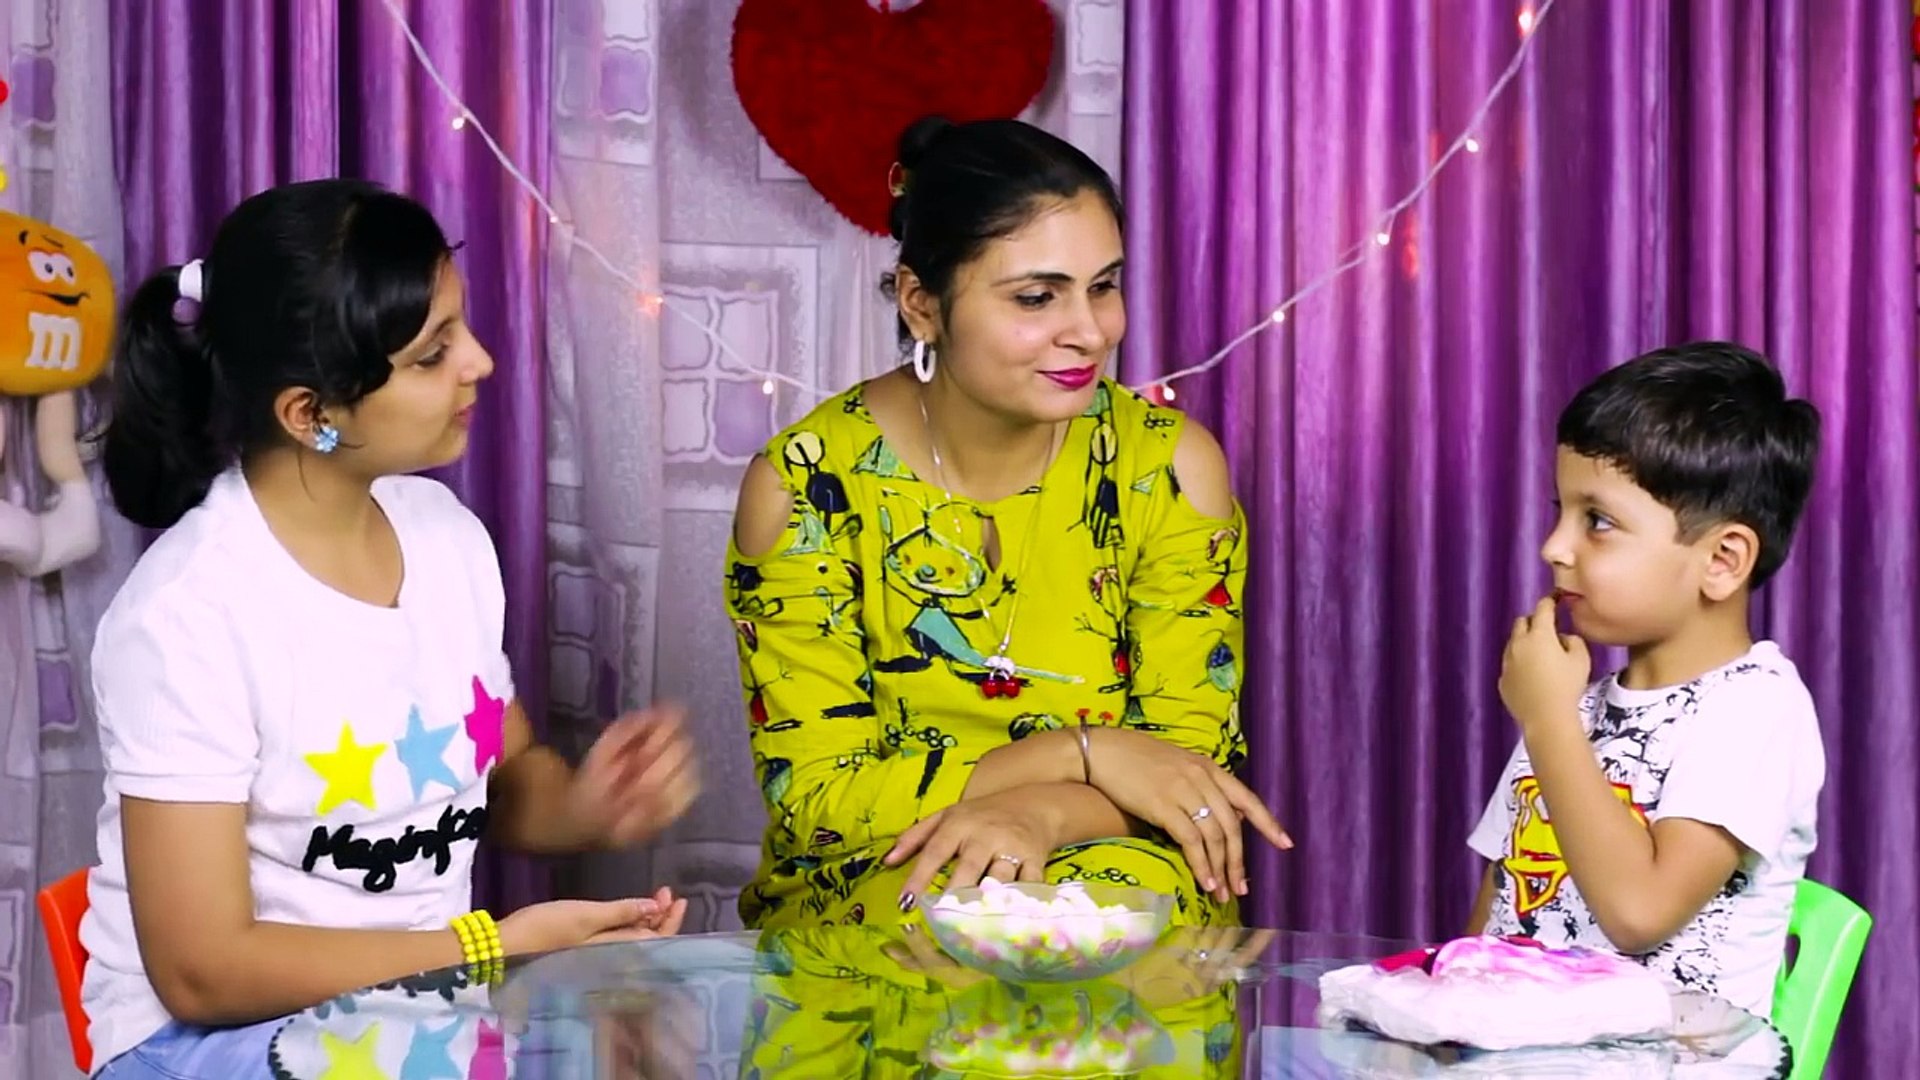 CHUBBY BUNNY CHALLENGE | #Bloopers | Sister vs Brother | Aayu and Pihu Show  - video Dailymotion